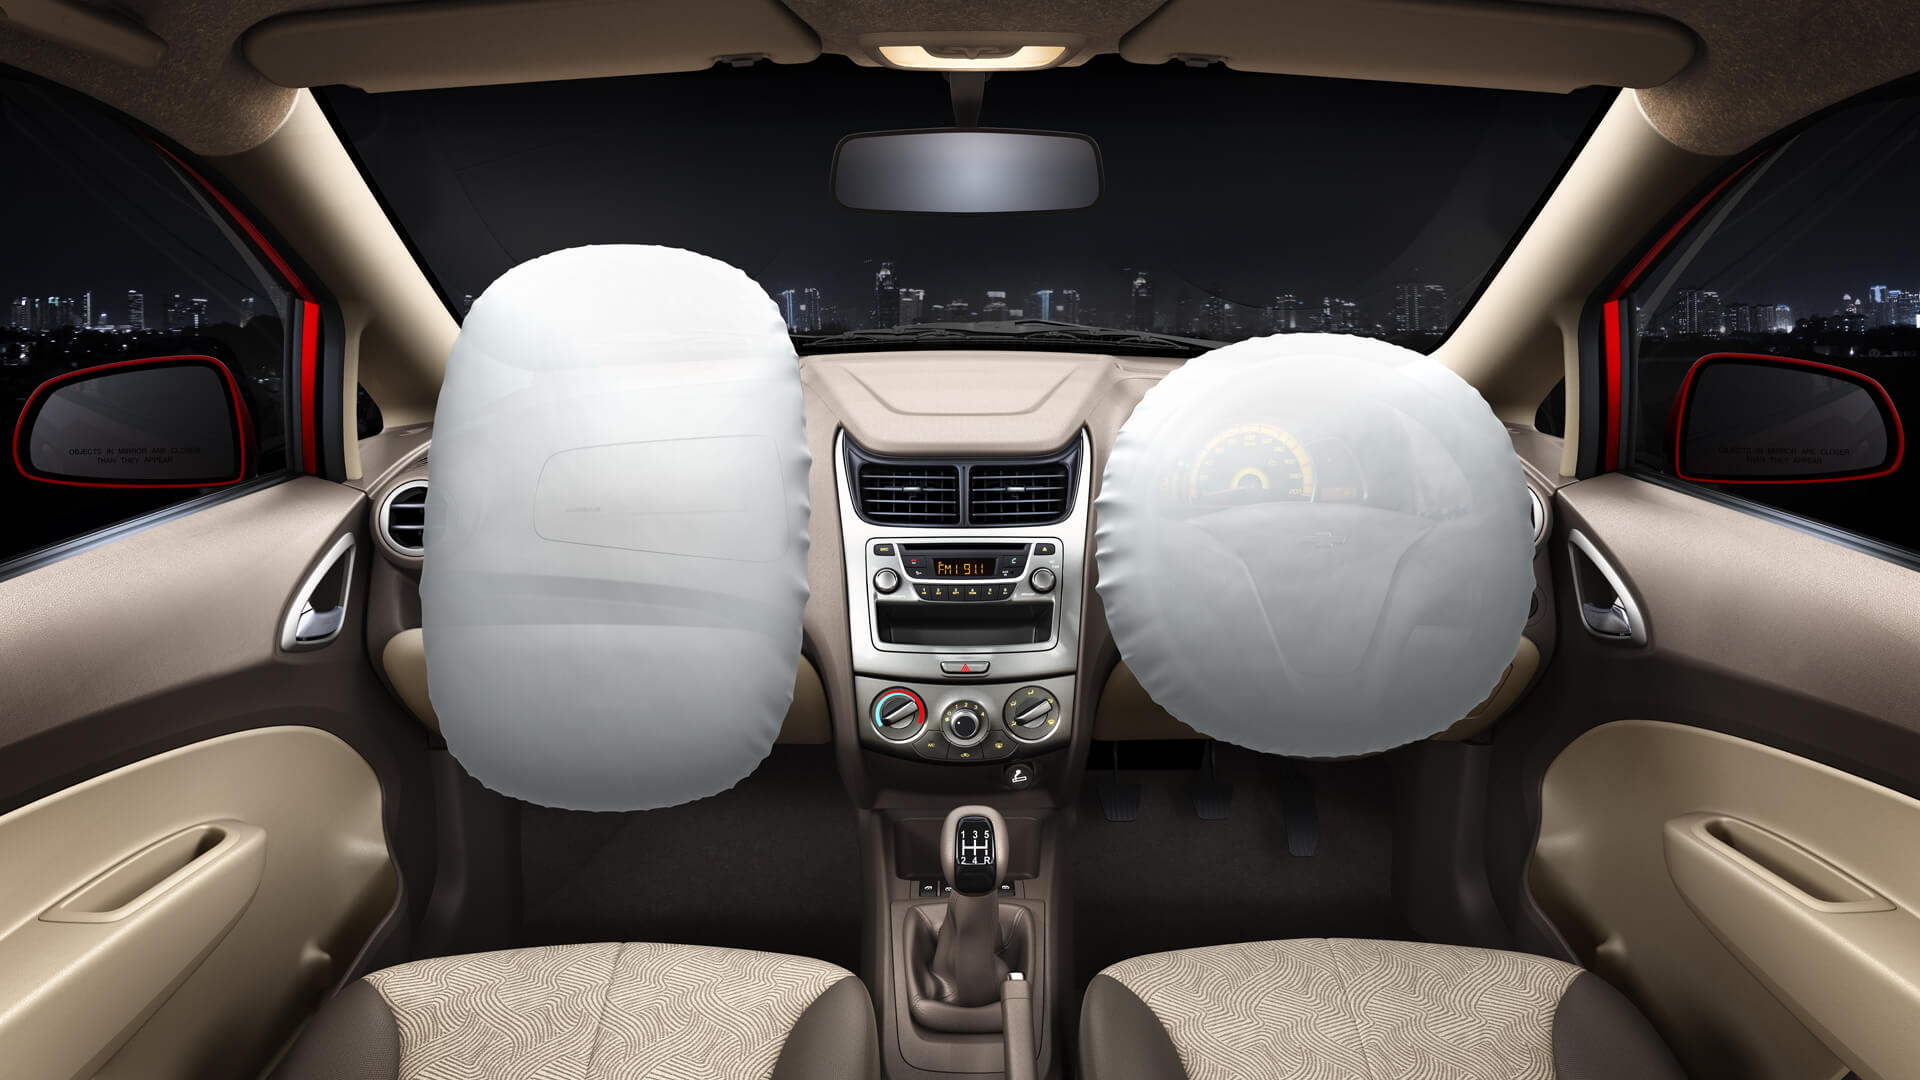 Chevrolet Sail Sedan Exteriors Interiors and Features Review By Car Blog  India  YouTube